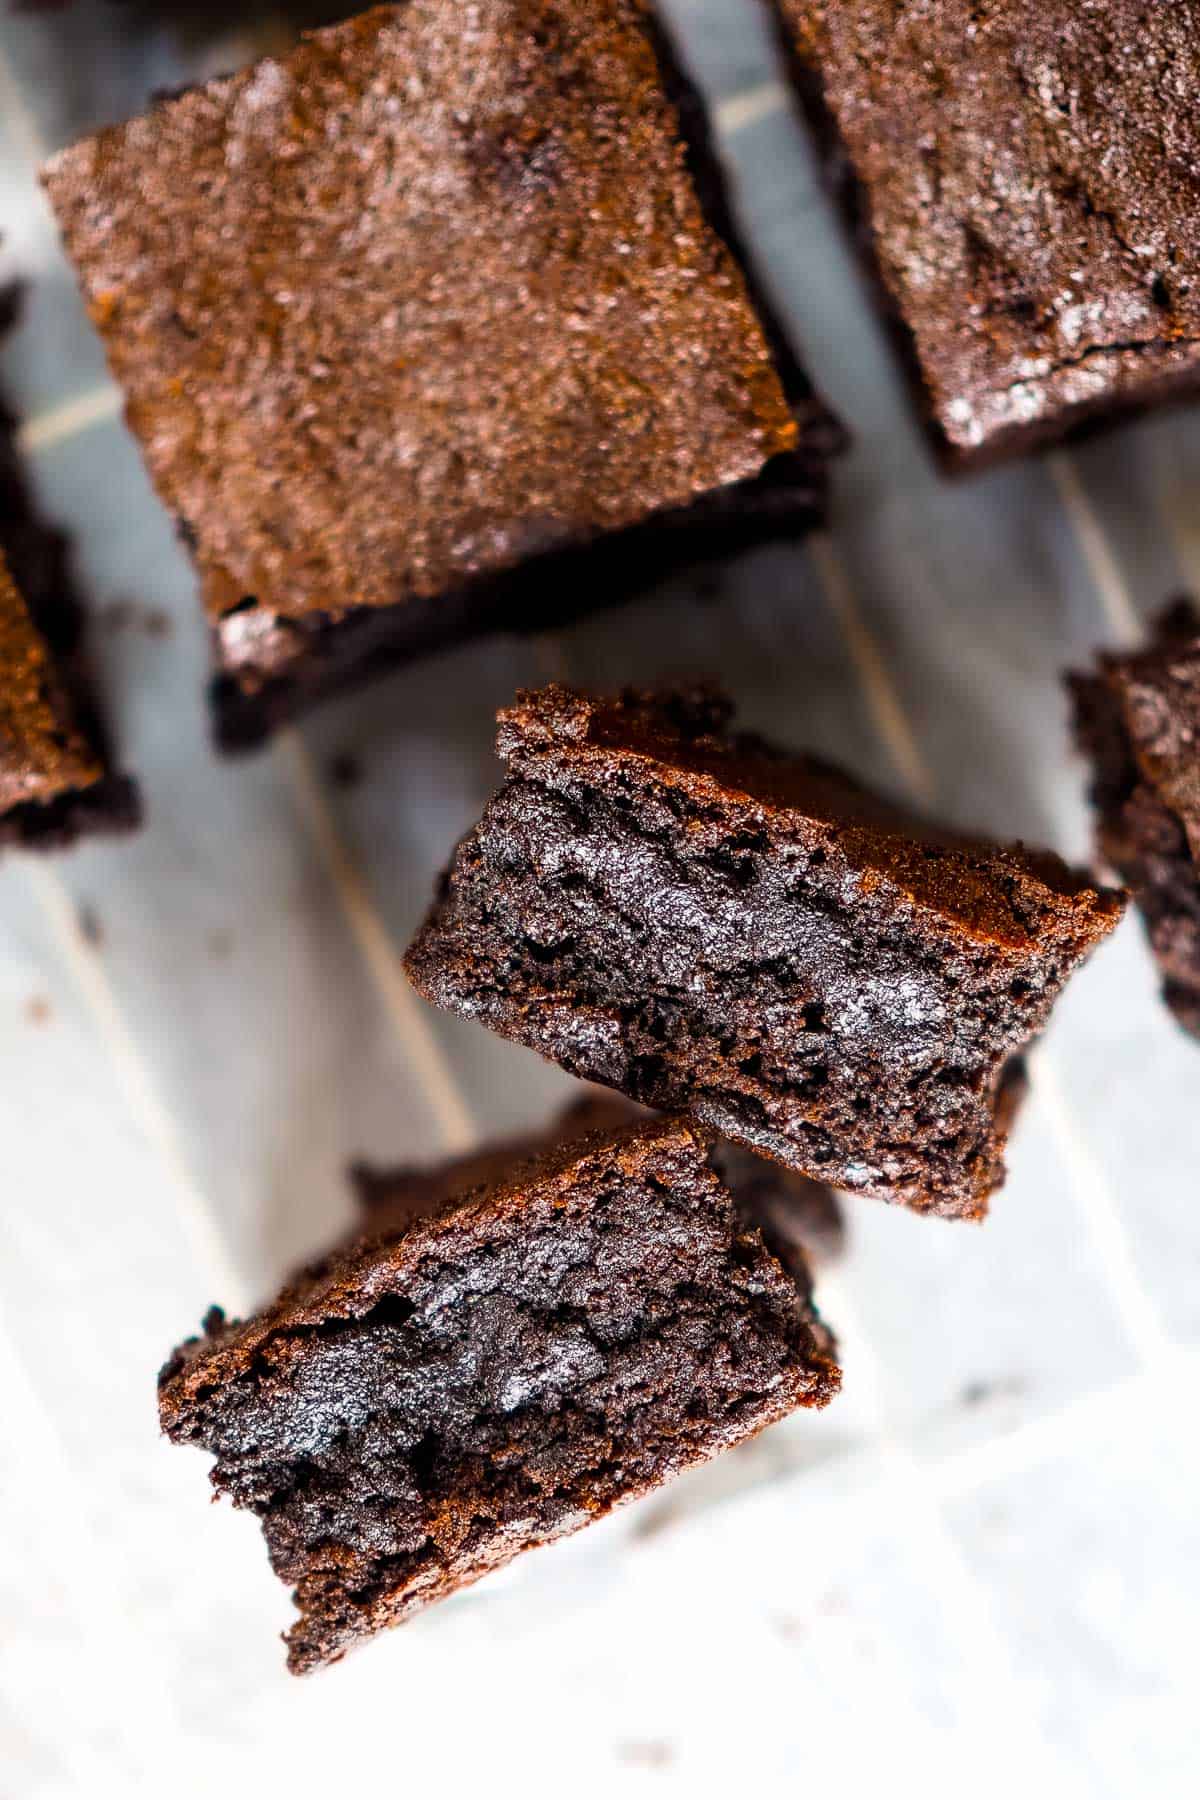 Side view of square blocks of chocolate brownies.